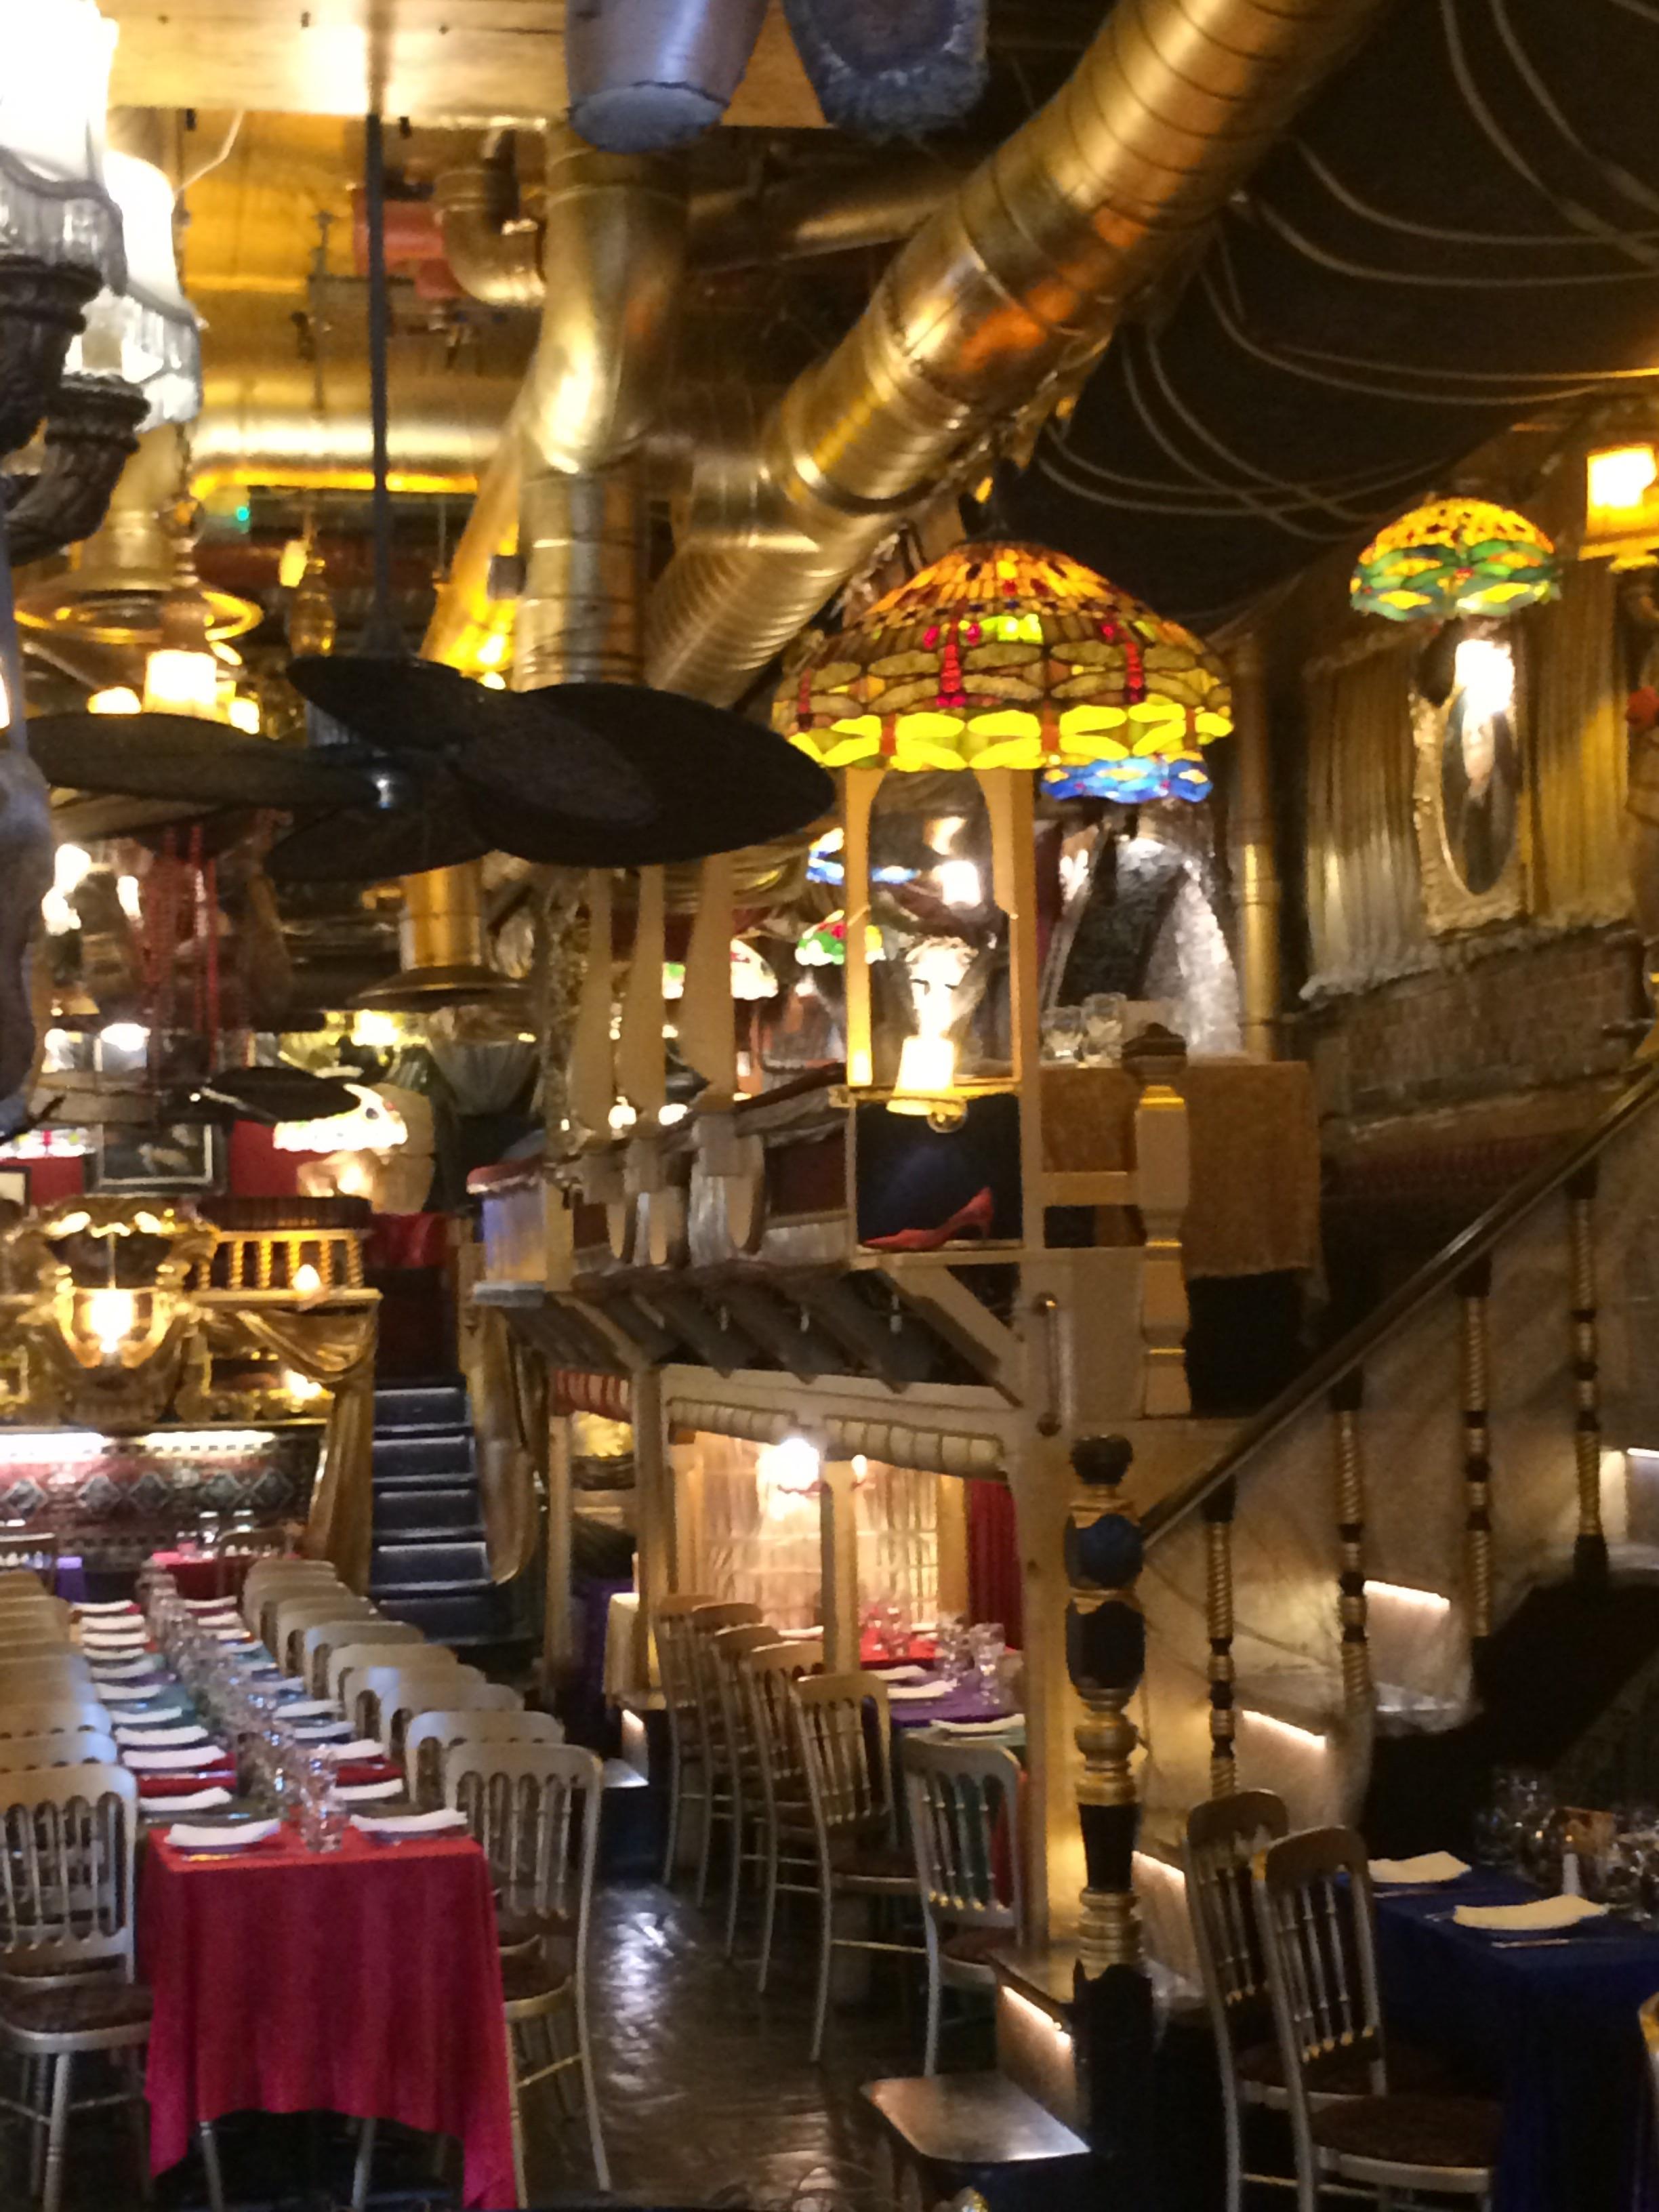 Cover image of this place Sarastro